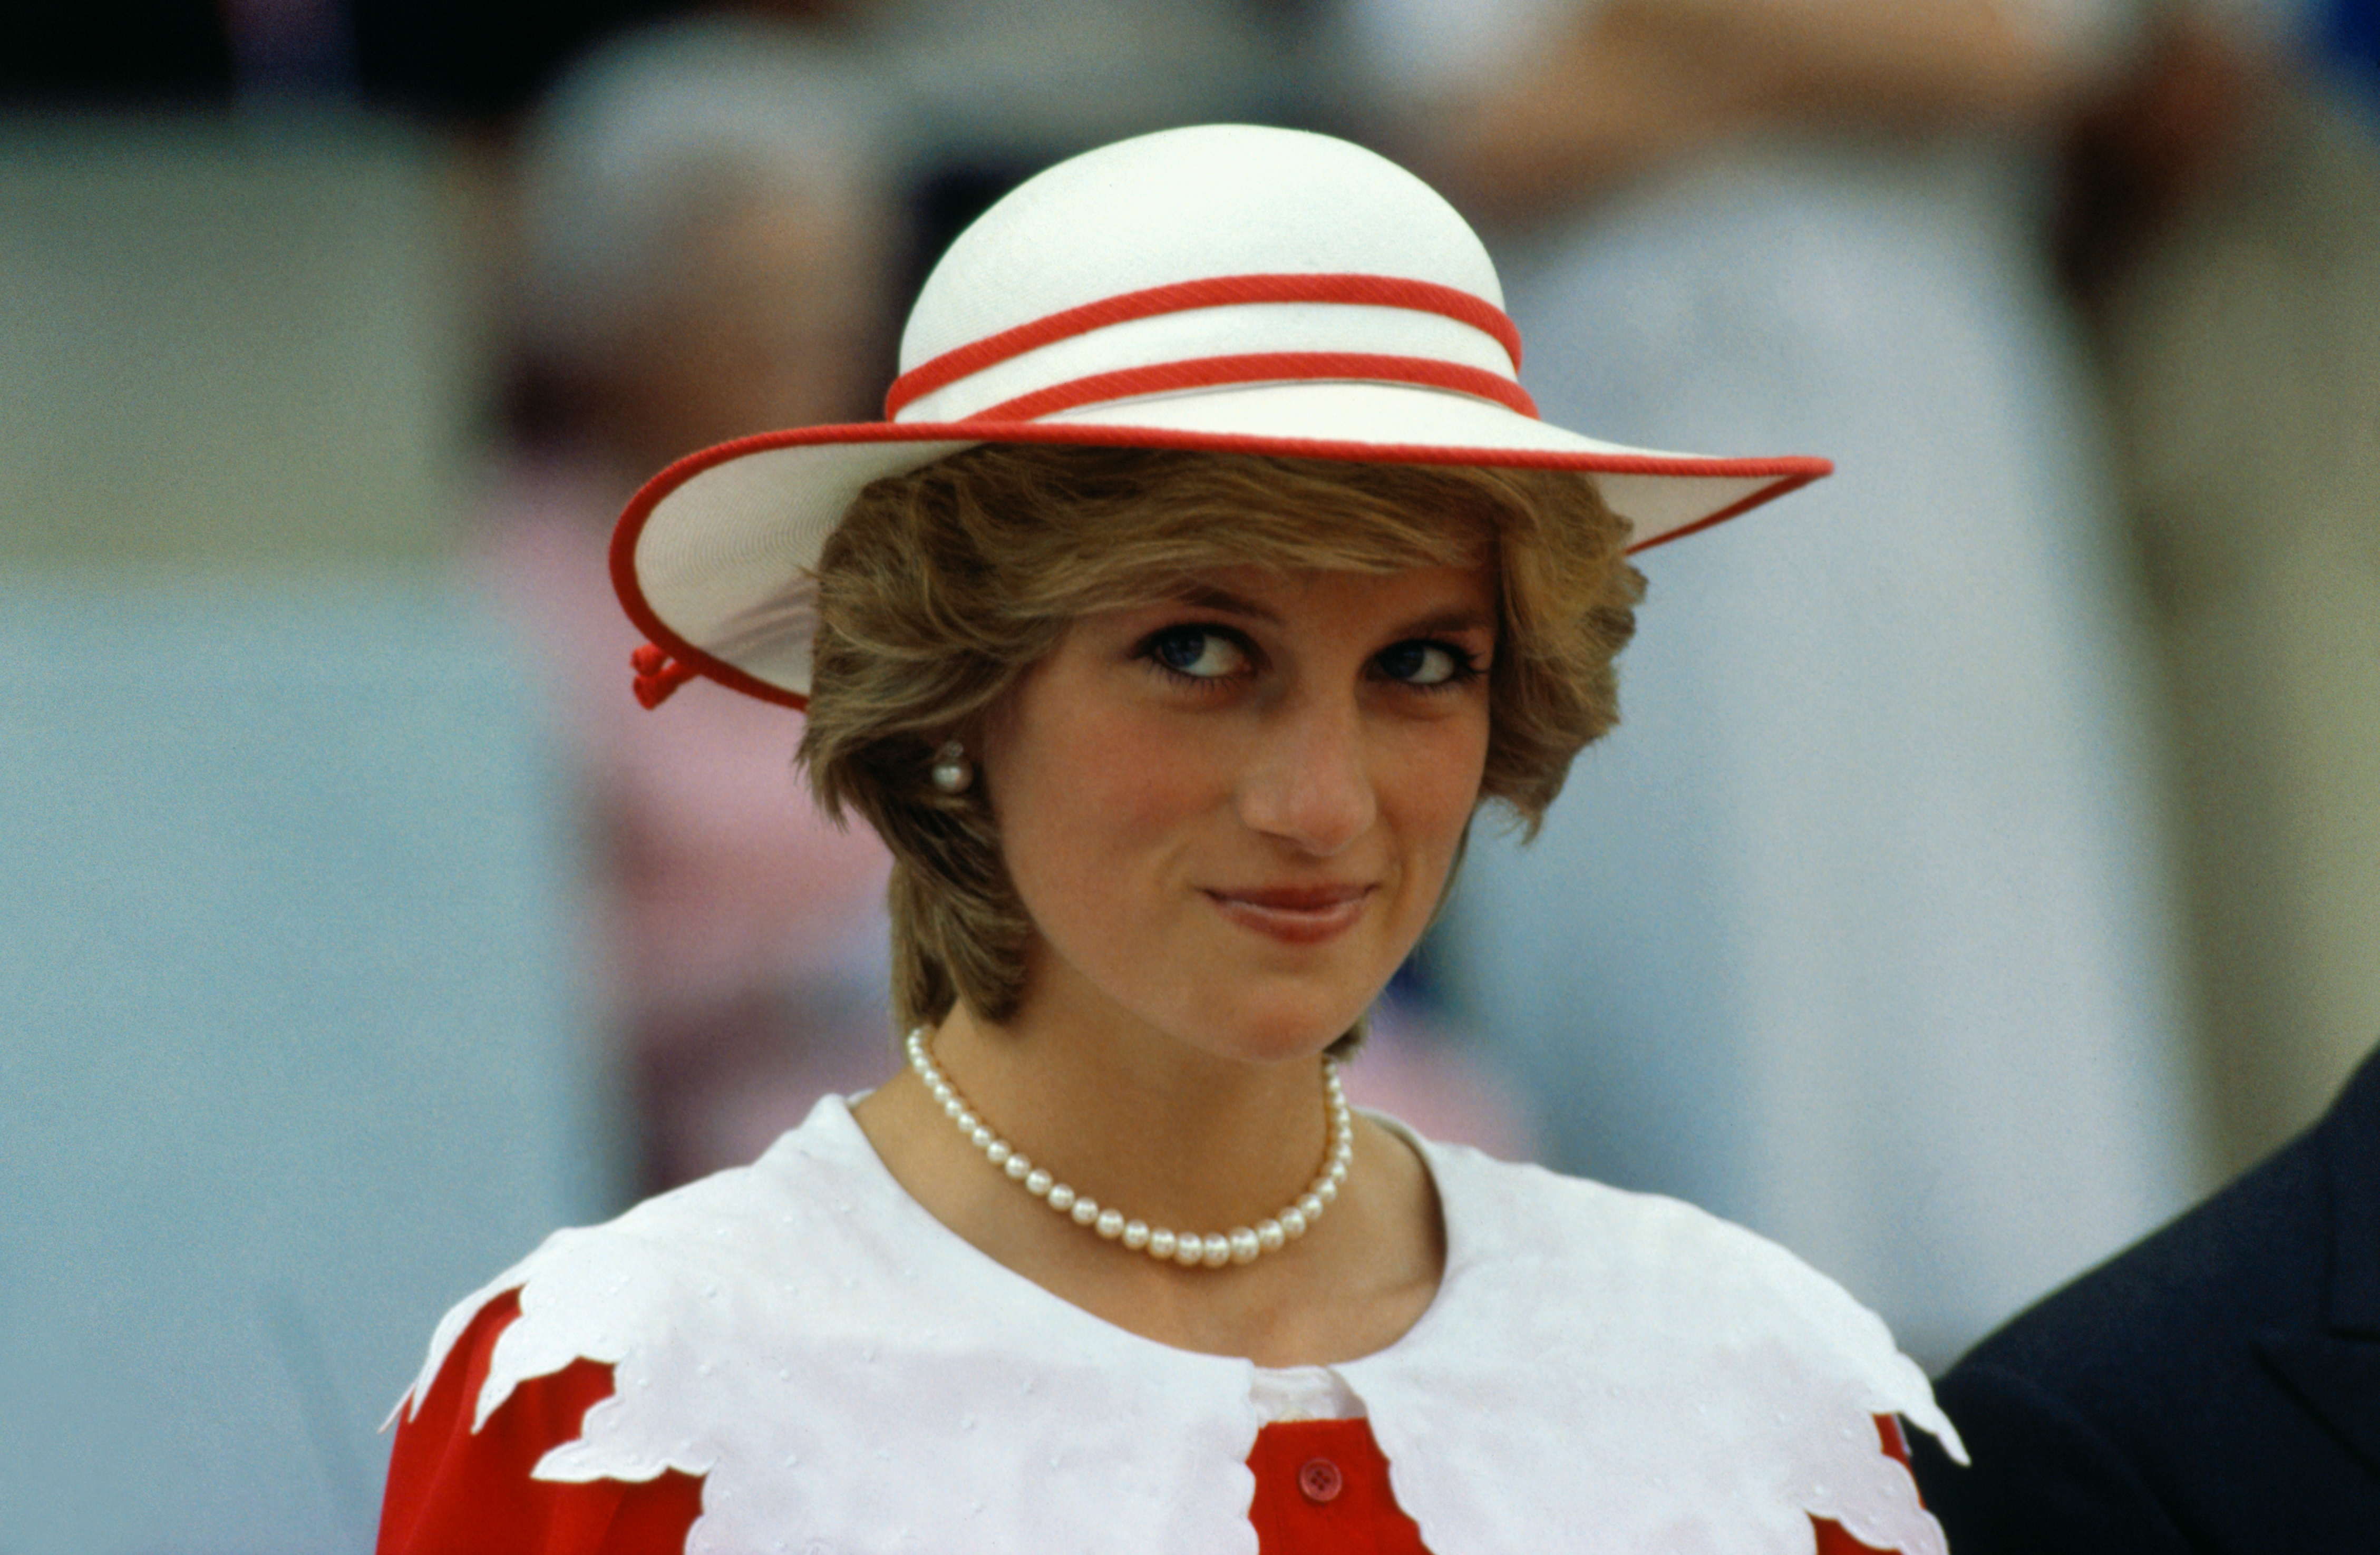 Diana, Princess of Wales during a state visit to Edmonton, Alberta on June 29, 1983 | Source: Getty Images